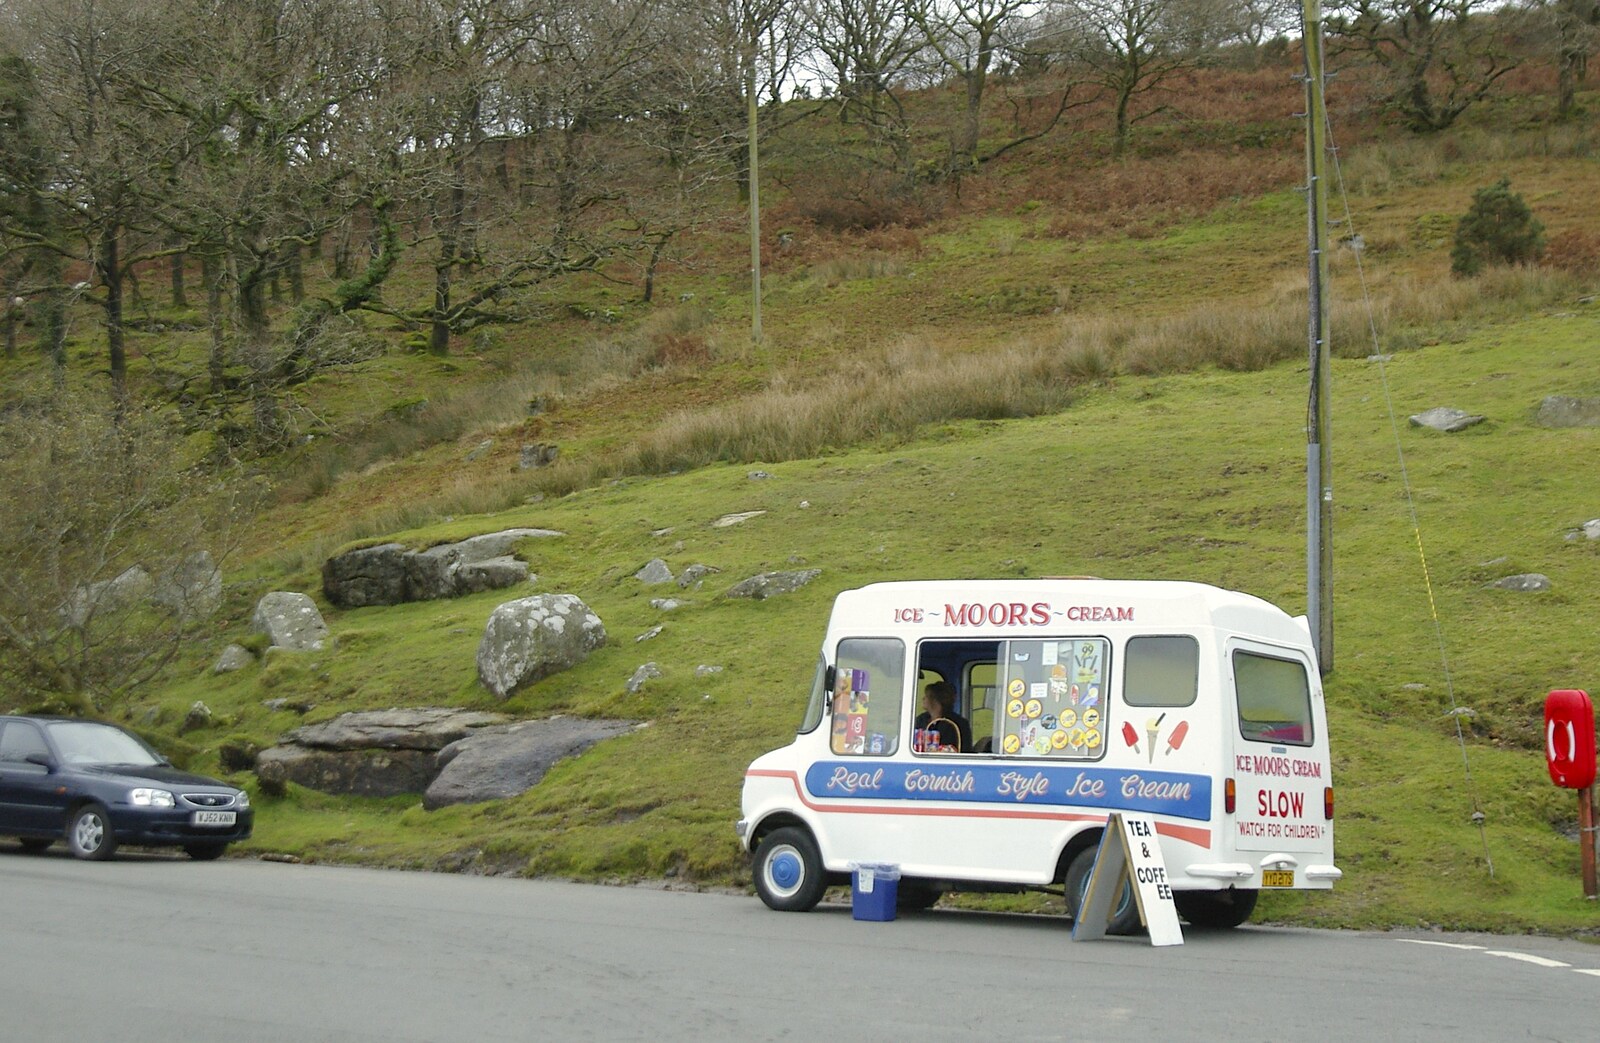 The ice-cream van is there, whatever the weather from A Wander Around Hoo Meavy and Burrator, Dartmoor, Devon - 18th December 2005